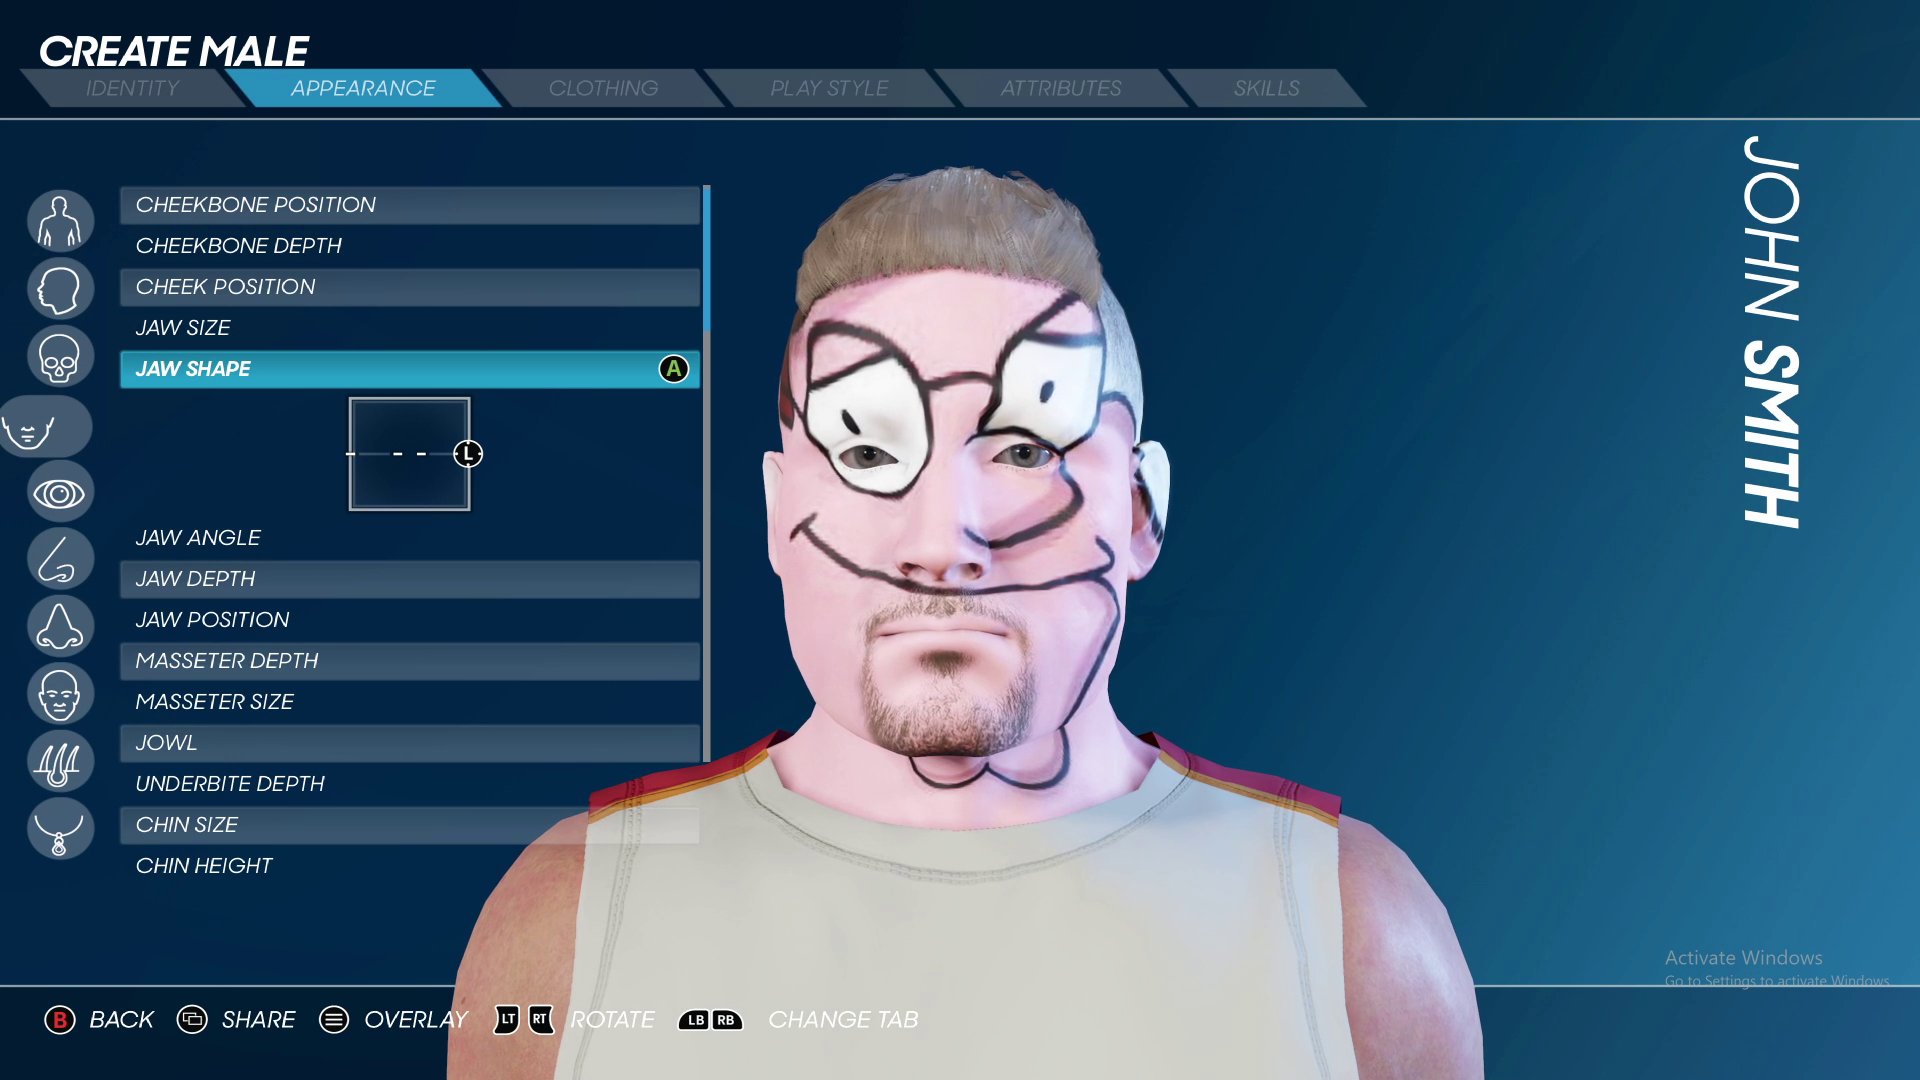 Picture of the character creation screen of AO Tennis 2, showing a man with an image of Peter Griffin grafted over his face.